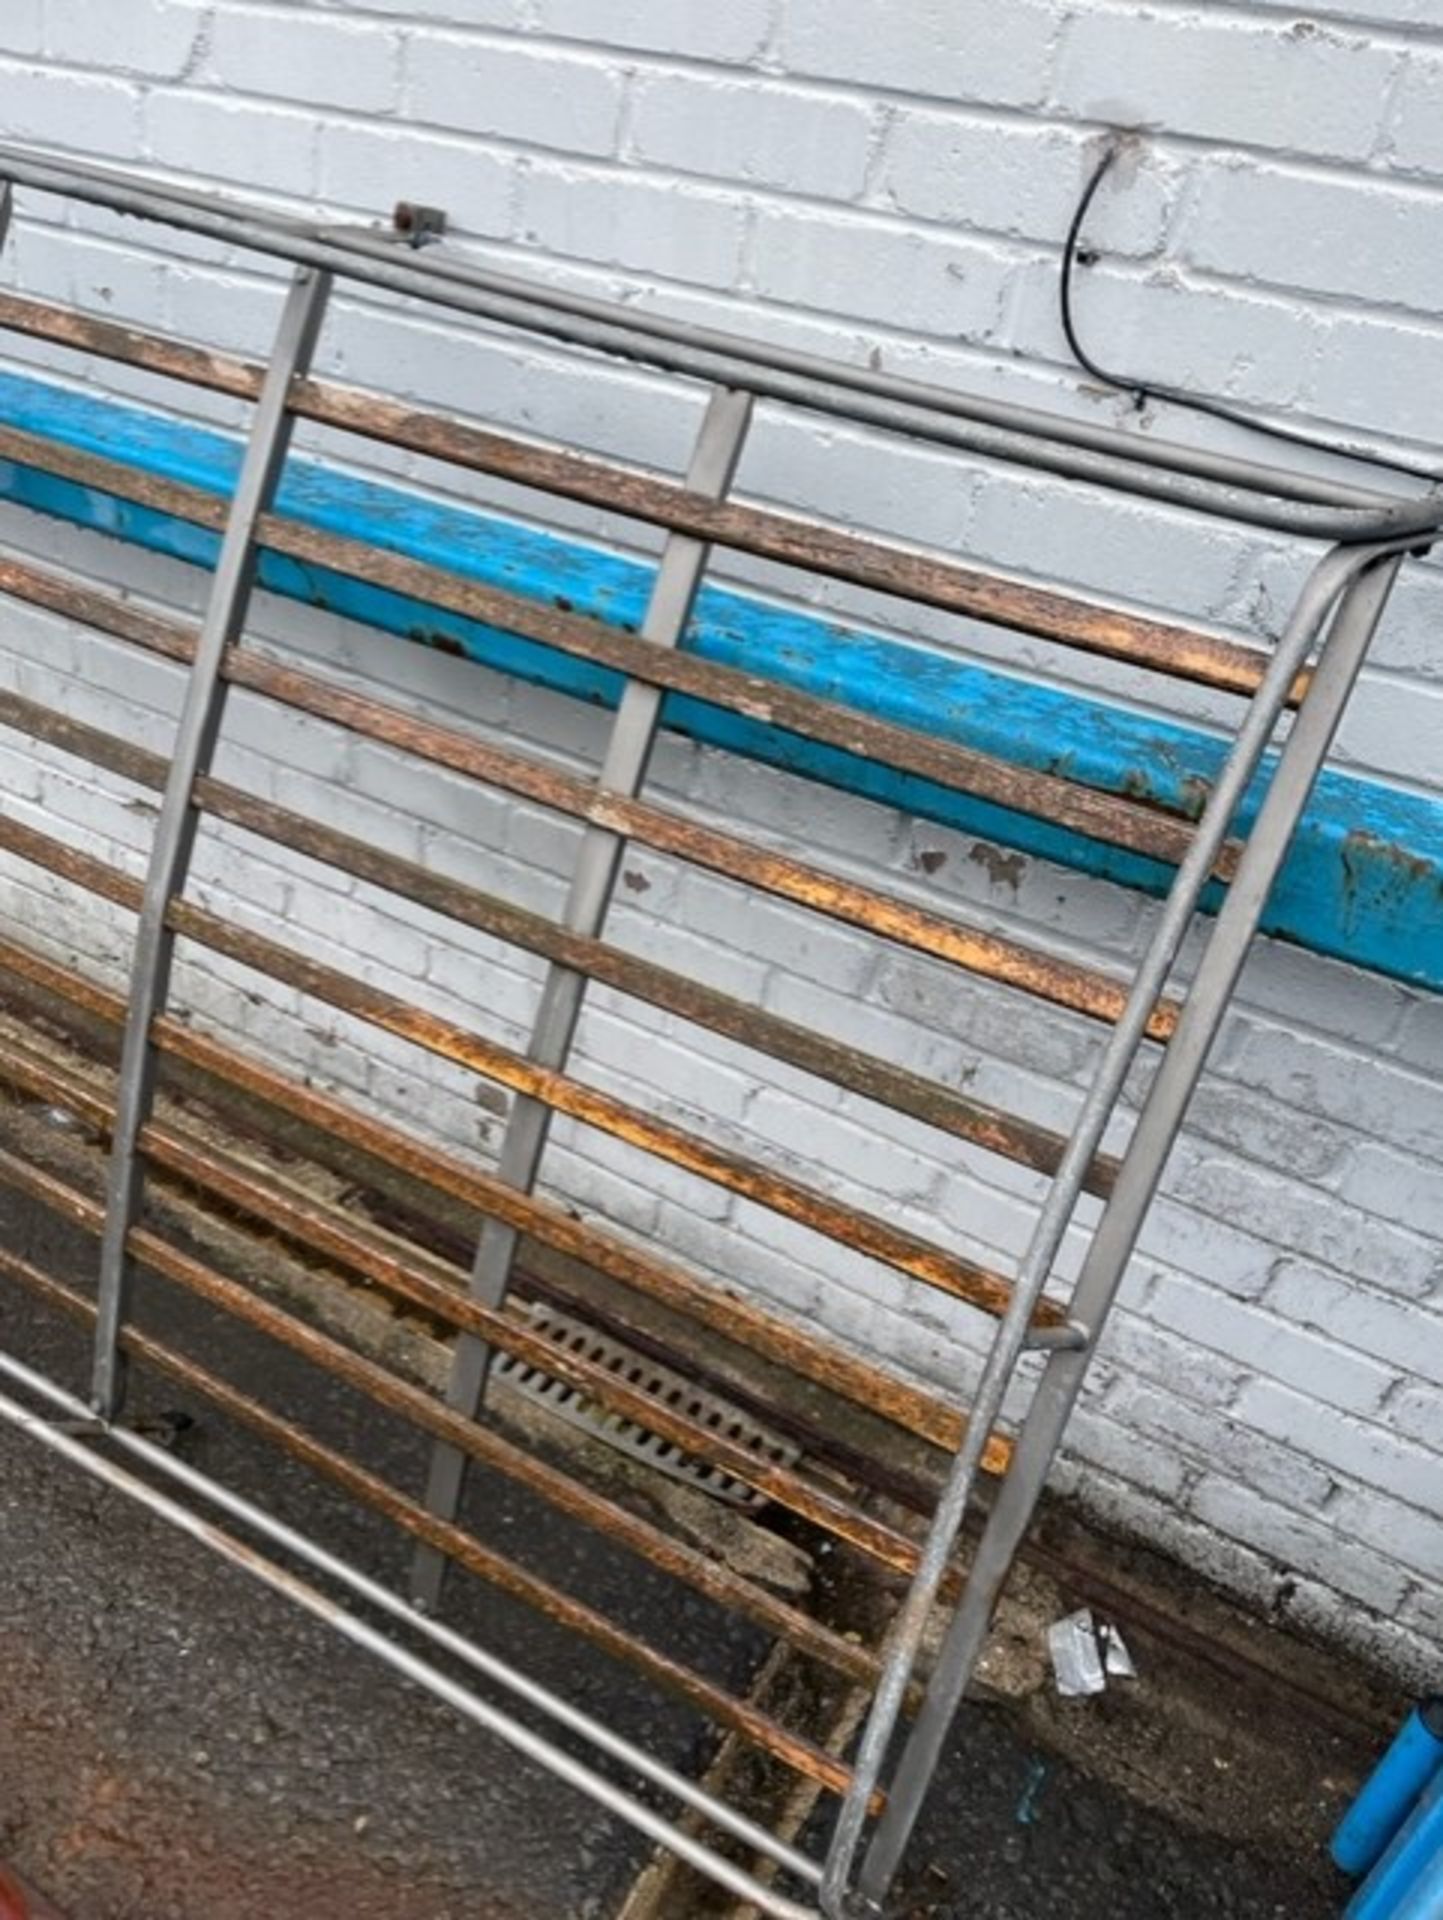 Old version vw camper van roof rack in fair condition if you have them you will know what this is - Image 2 of 4